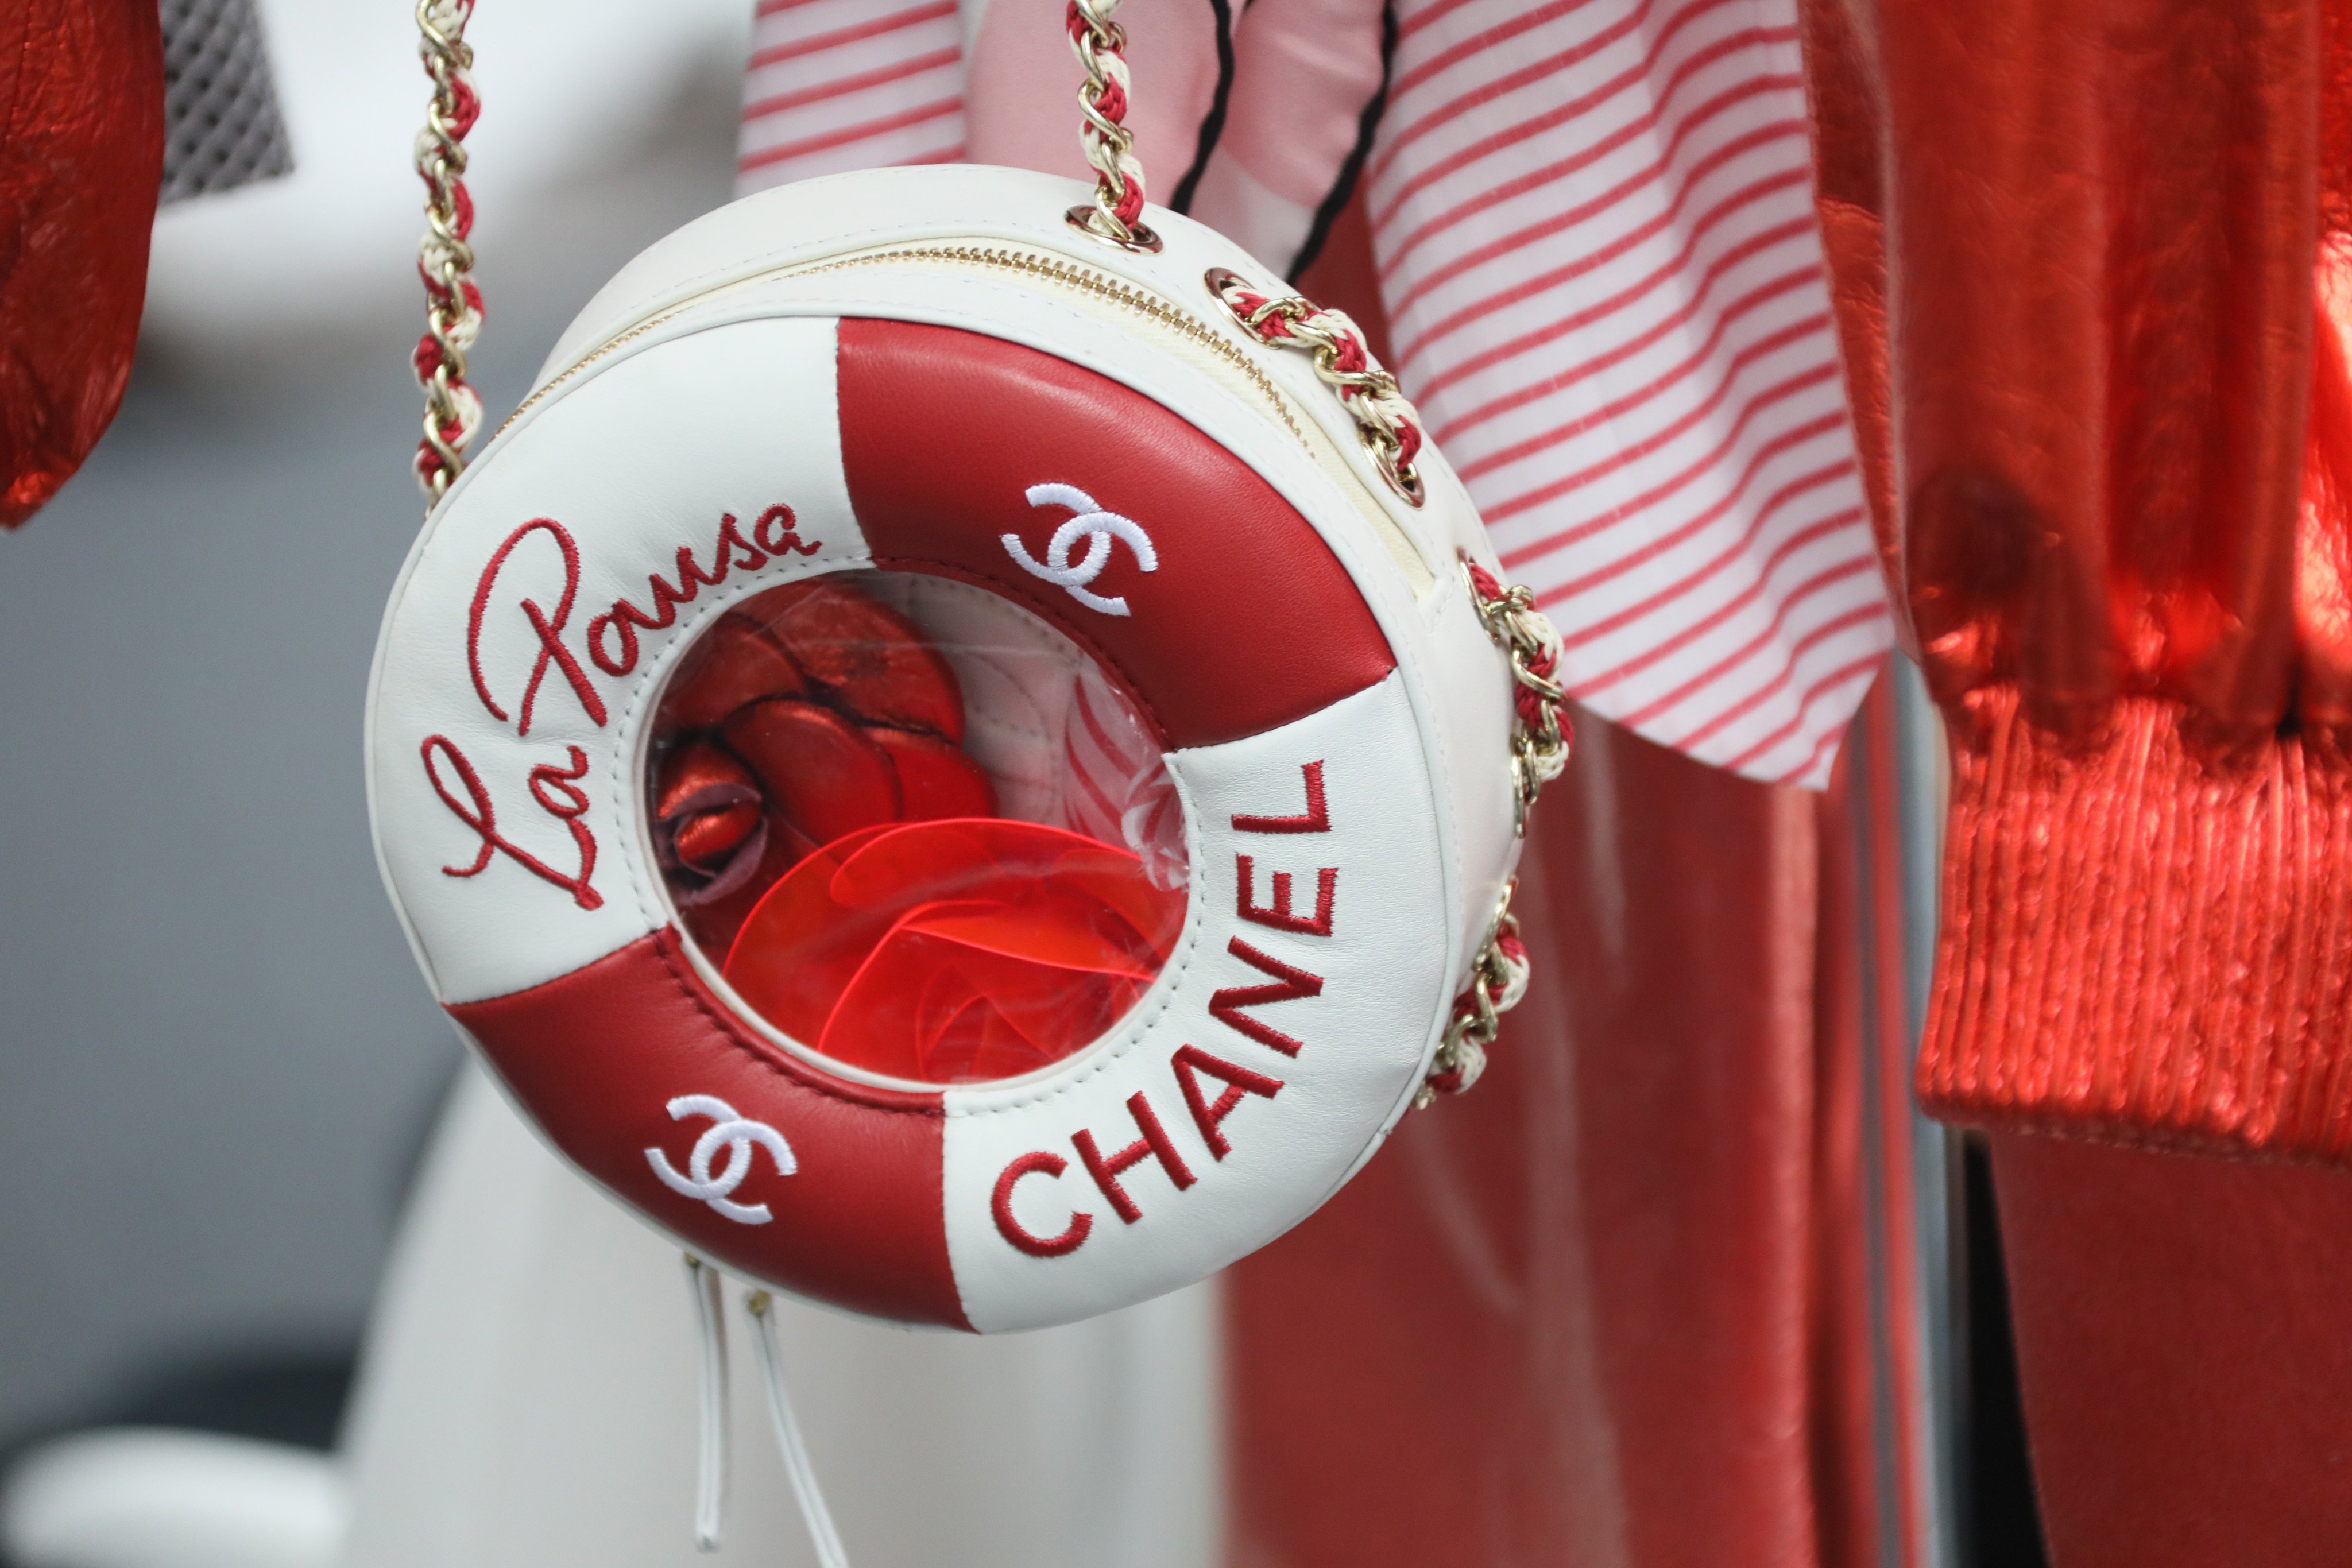 CHANEL on X: 'La Pausa', the name of the CHANEL liner and Gabrielle  Chanel's villa on the French Riviera, appeared on sweaters, buttons,  bracelets and bags in the #CHANELCruise 2018/19 collection.   /